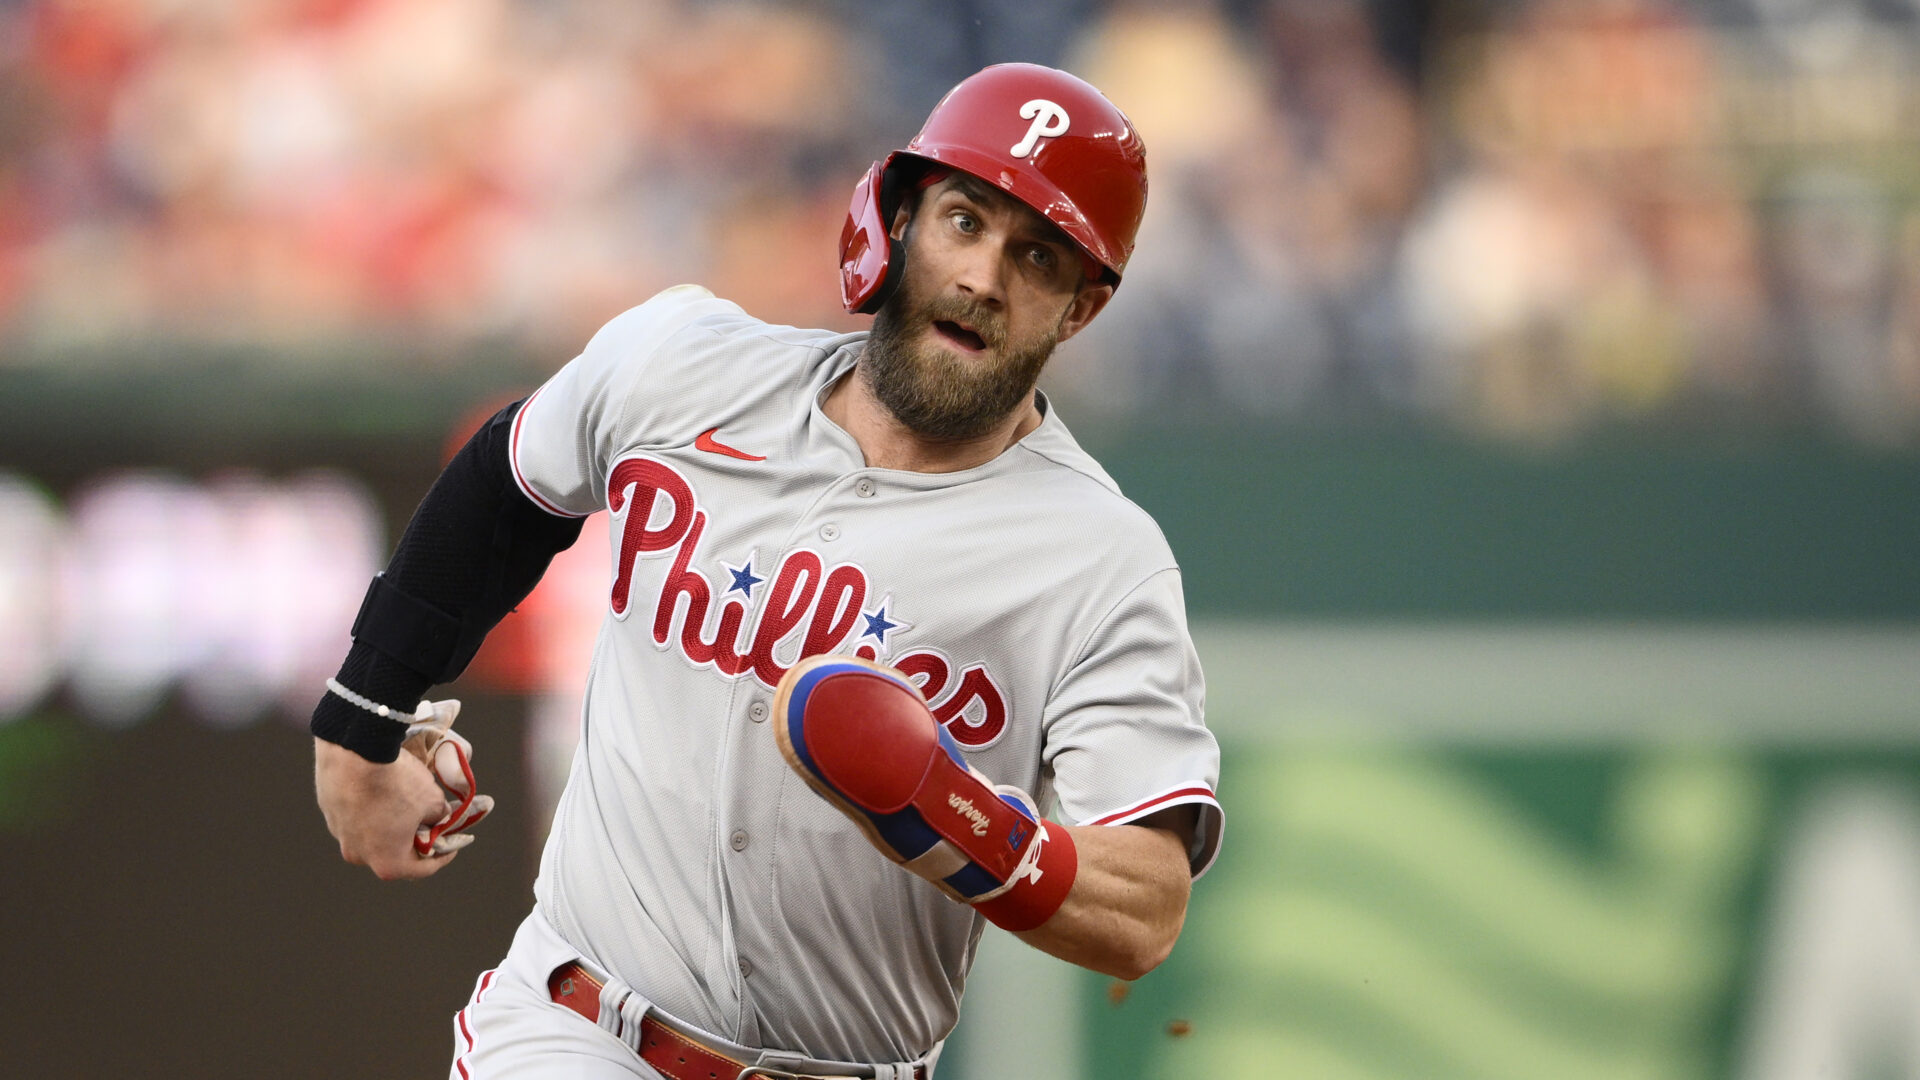 Phillies Bryce Harper headed to IronPigs for weeklong rehab assignment